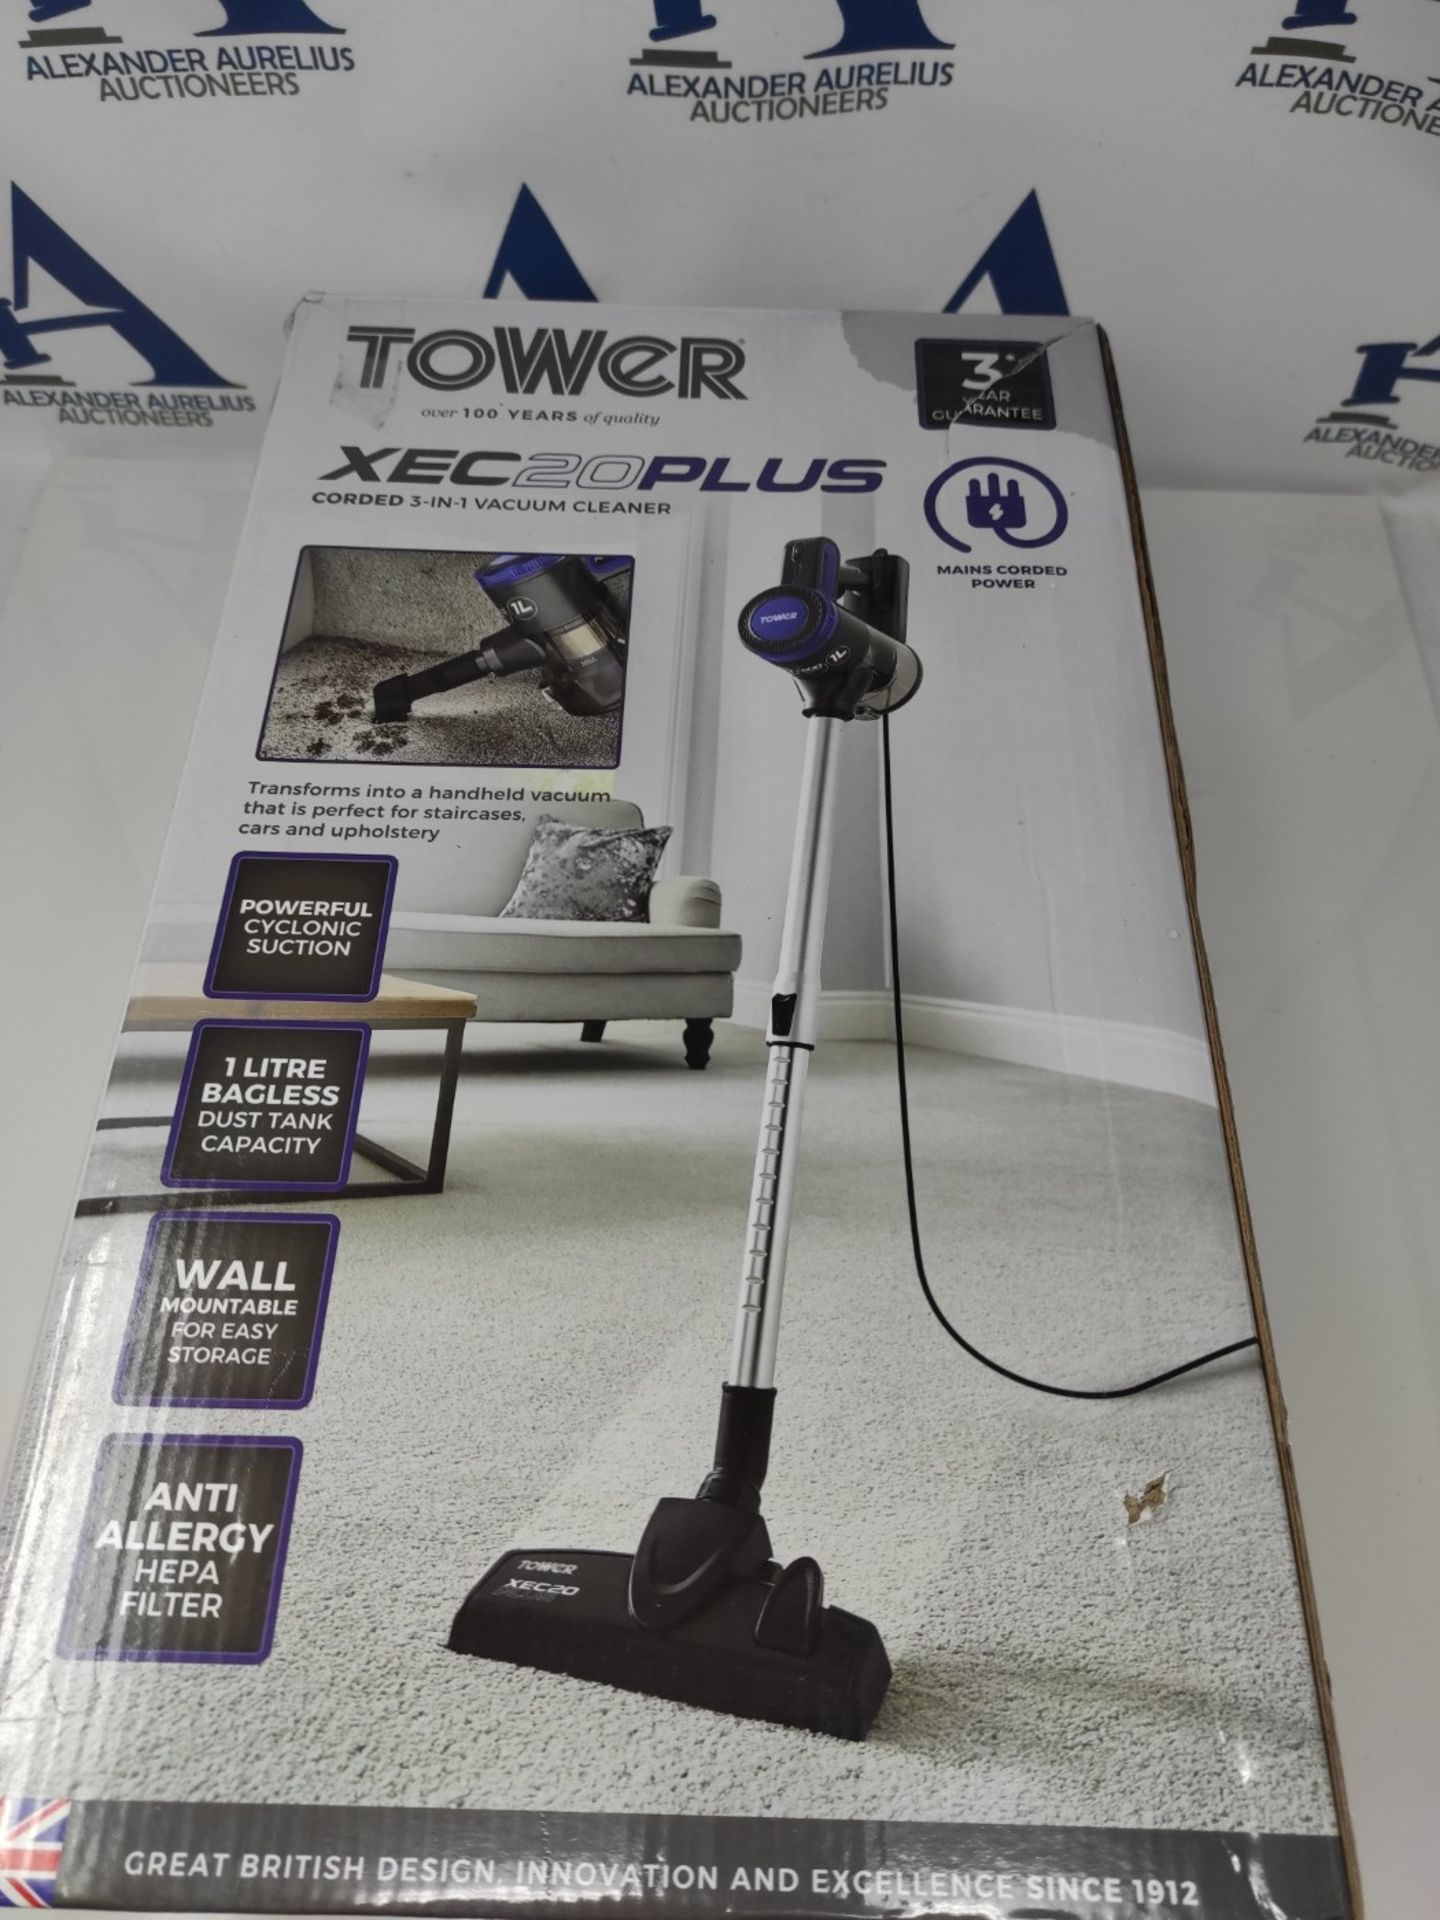 Tower T513005 Pro XEC20 Corded 3-in-1 Vacuum Cleaner with Cyclonic Suction, Built-in H - Image 2 of 3